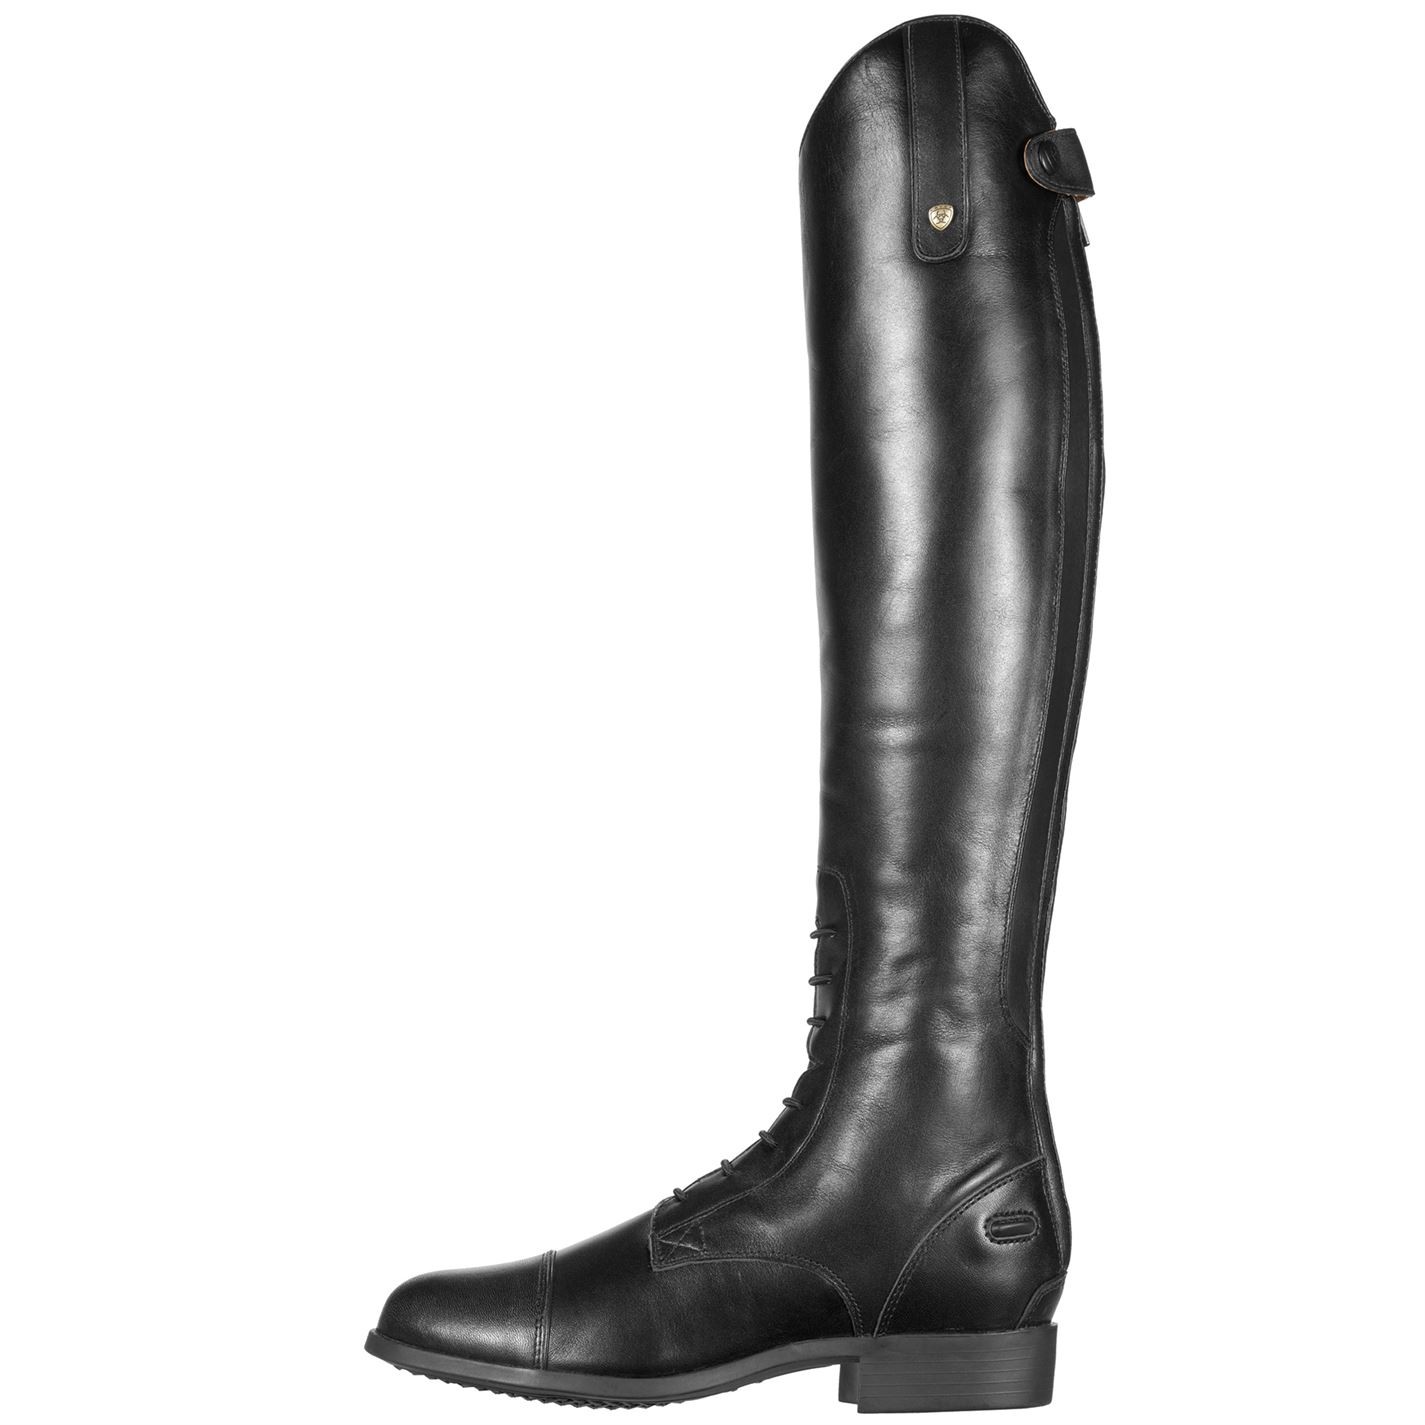 Ariat Women's Heritage Contour Tall Field Zip Boots (Black) - Old Dairy ...